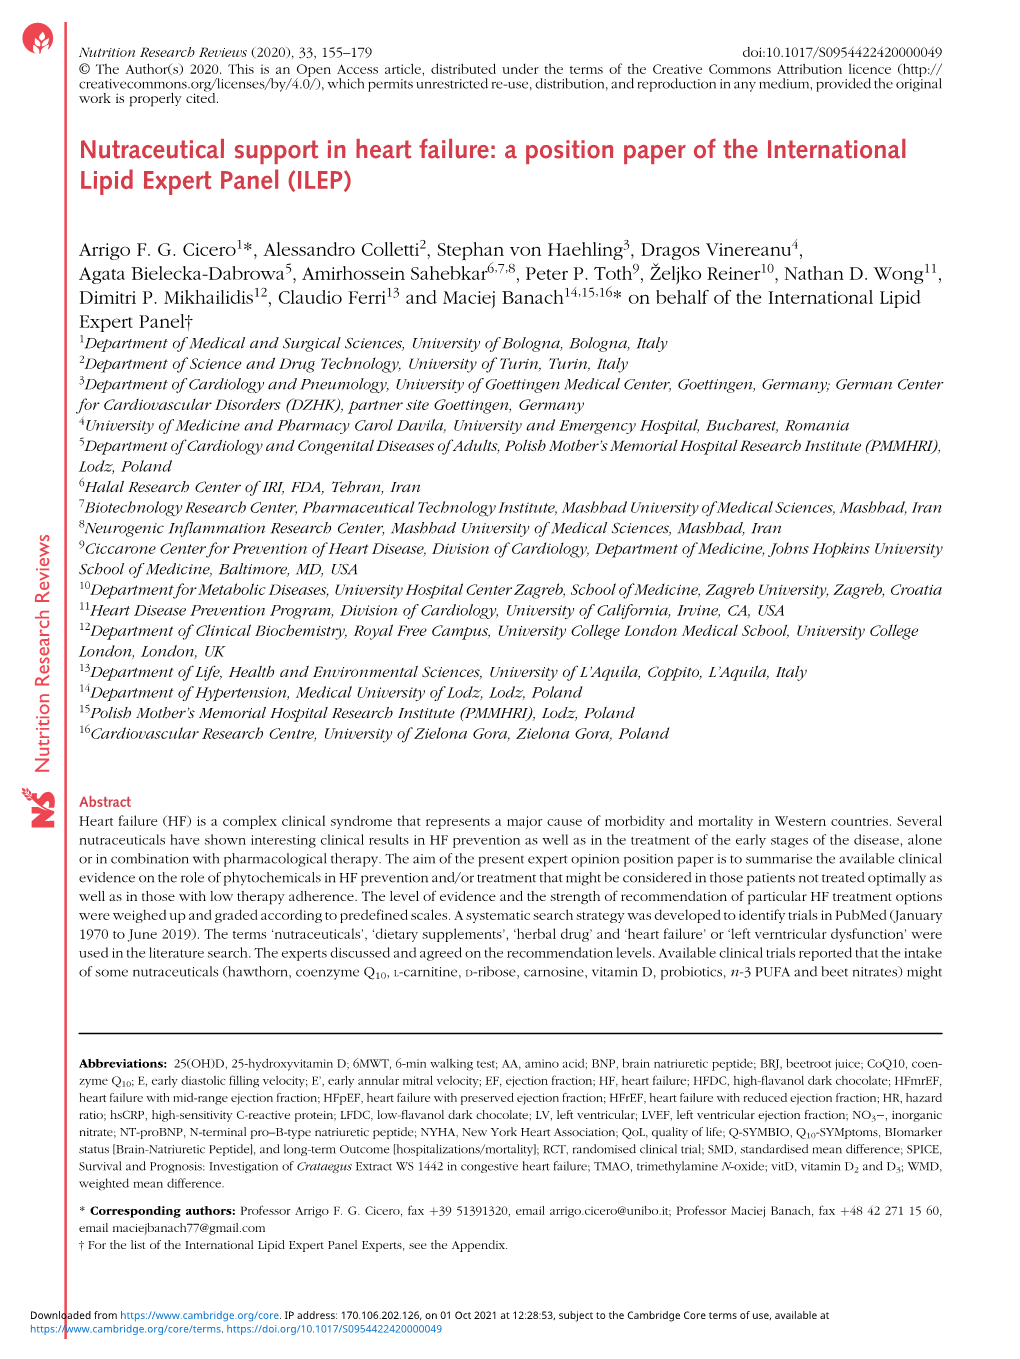 Nutraceutical Support in Heart Failure: a Position Paper of the International Lipid Expert Panel (ILEP)